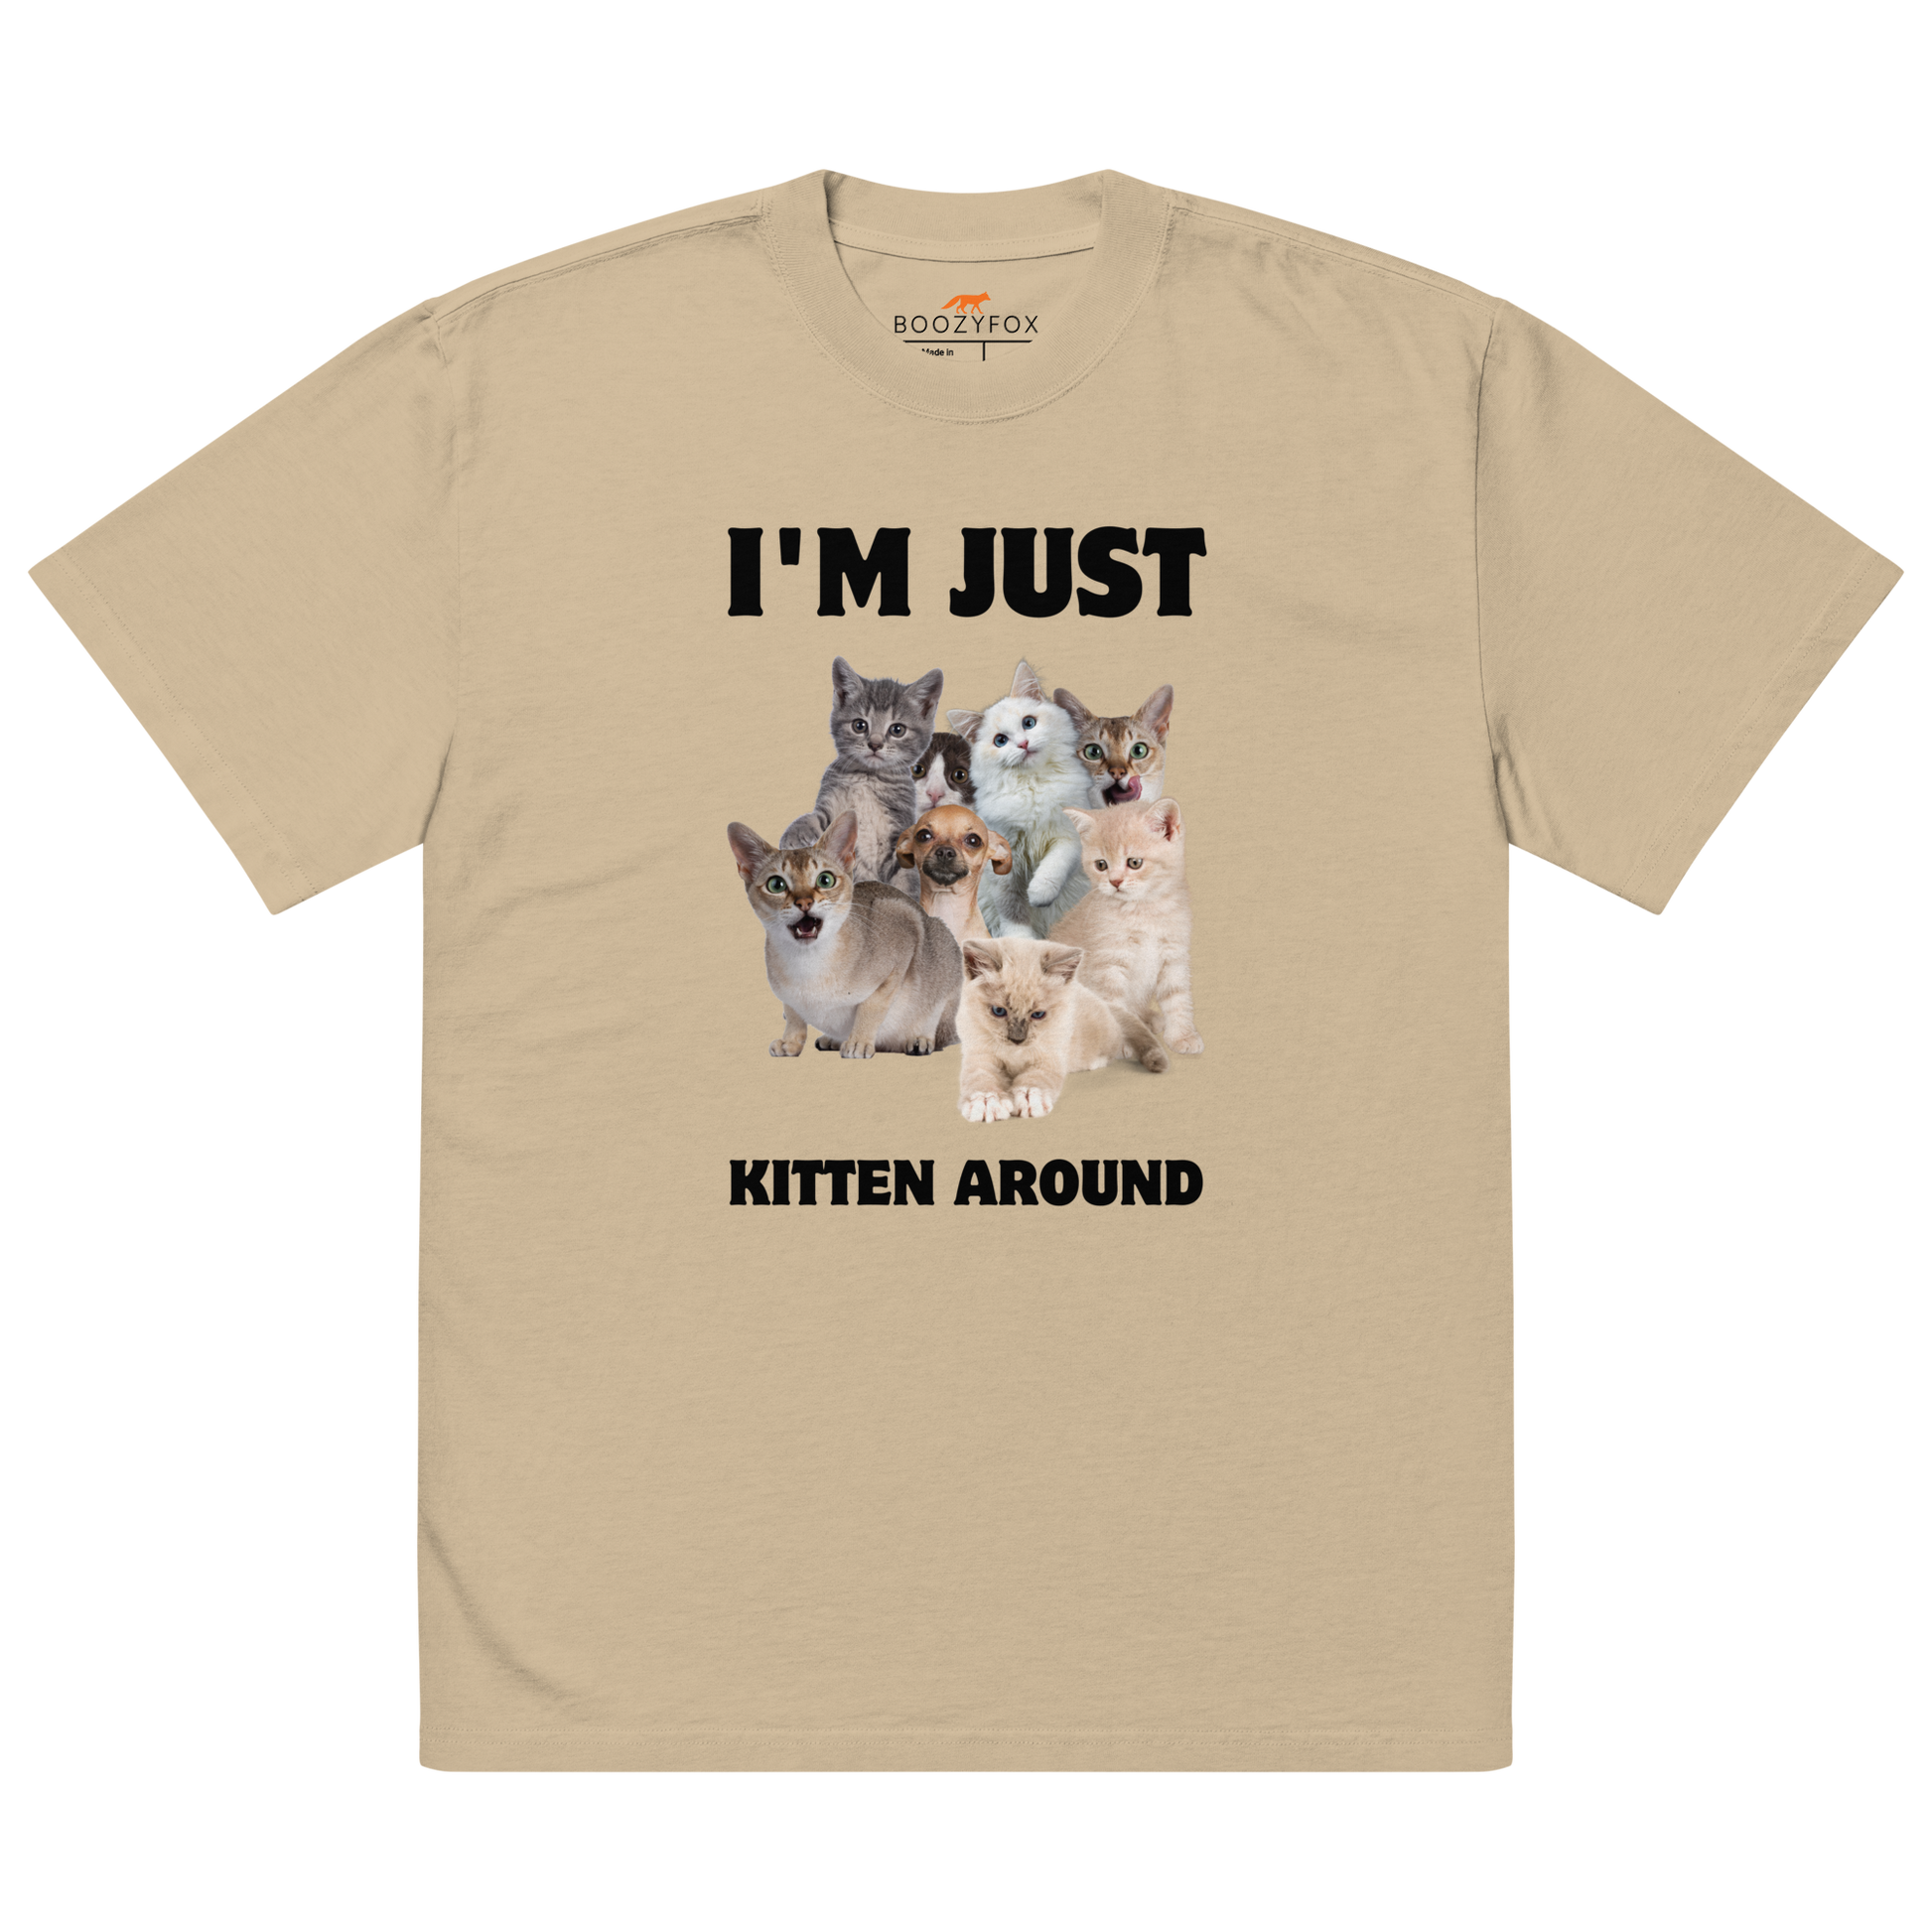 Faded Khaki Cat Oversized T-Shirt featuring an I'm Just Kitten Around graphic on the chest - Funny Graphic Cat Oversized Tees - Boozy Fox